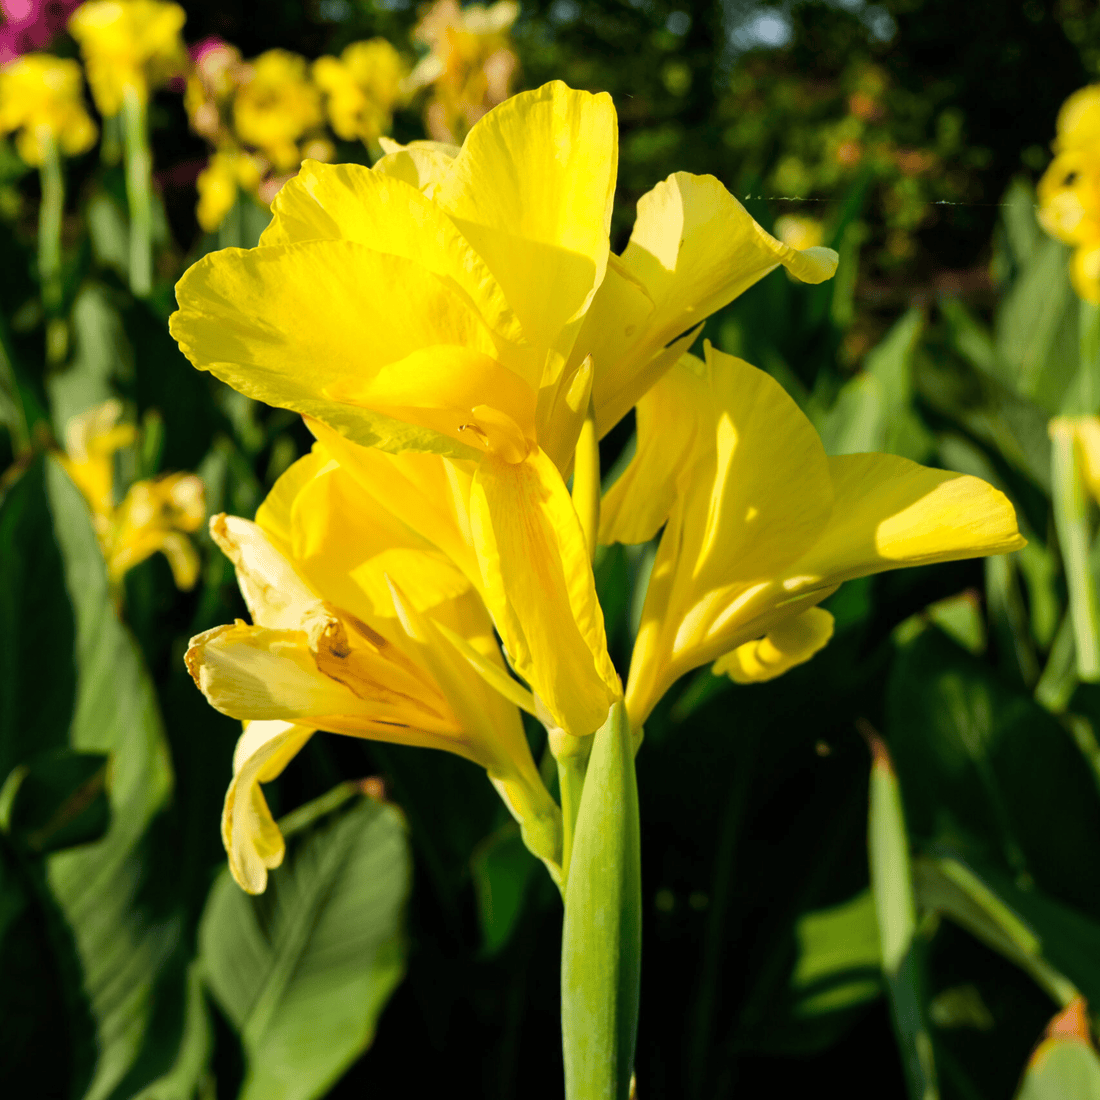 Yellow Canna Lily / Indian Shot (Canna indica) Flowering Live Plant